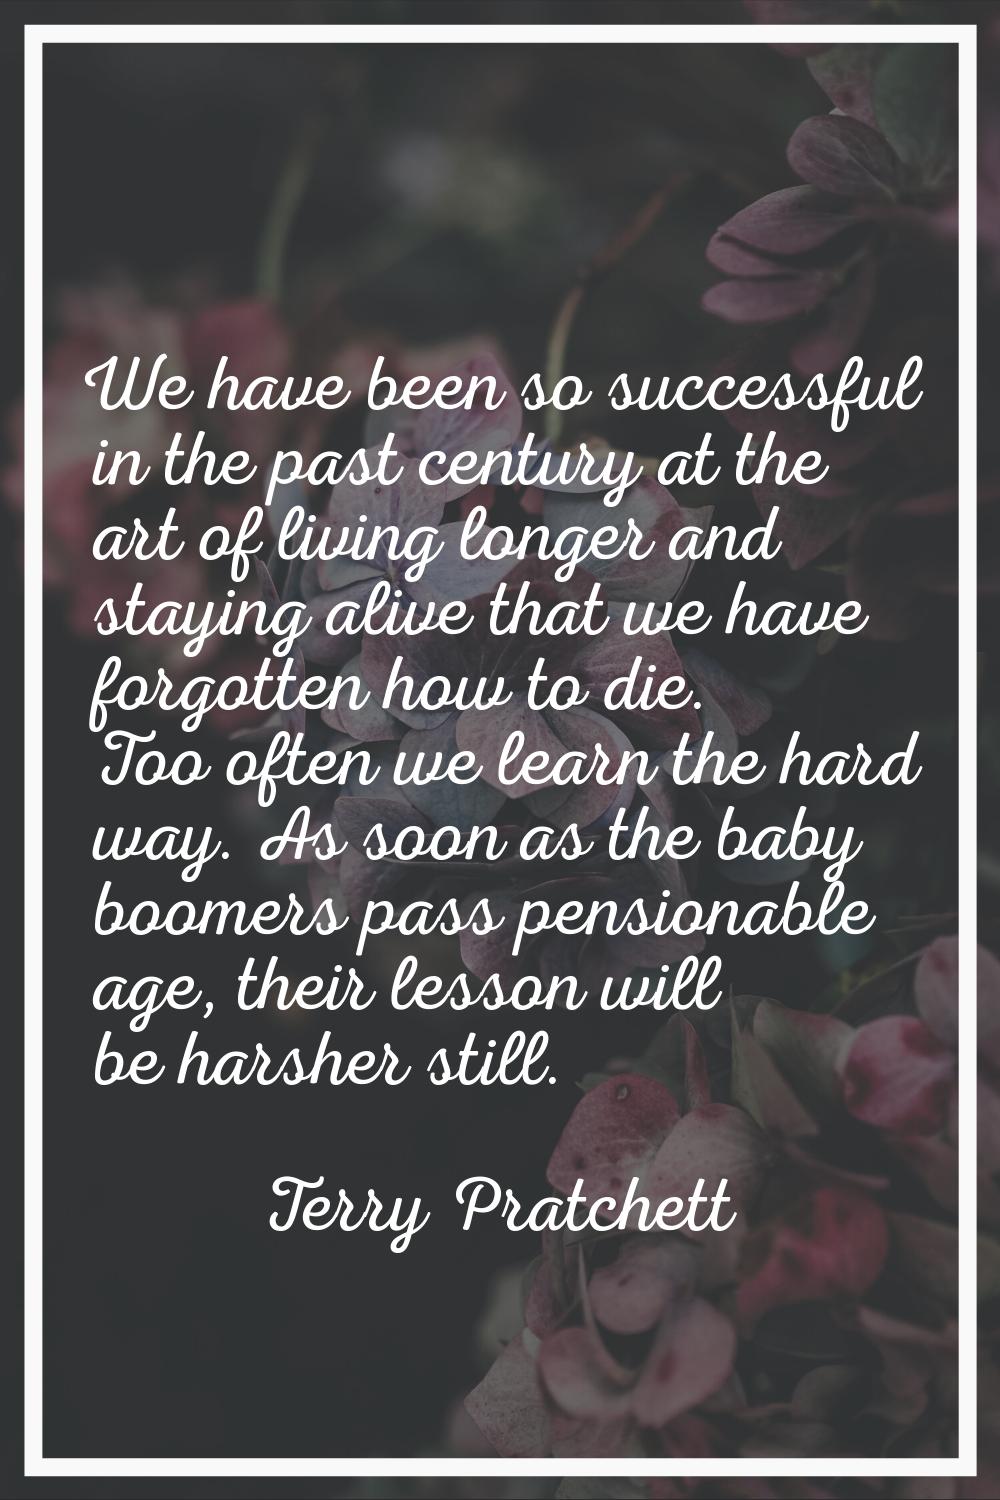 We have been so successful in the past century at the art of living longer and staying alive that w